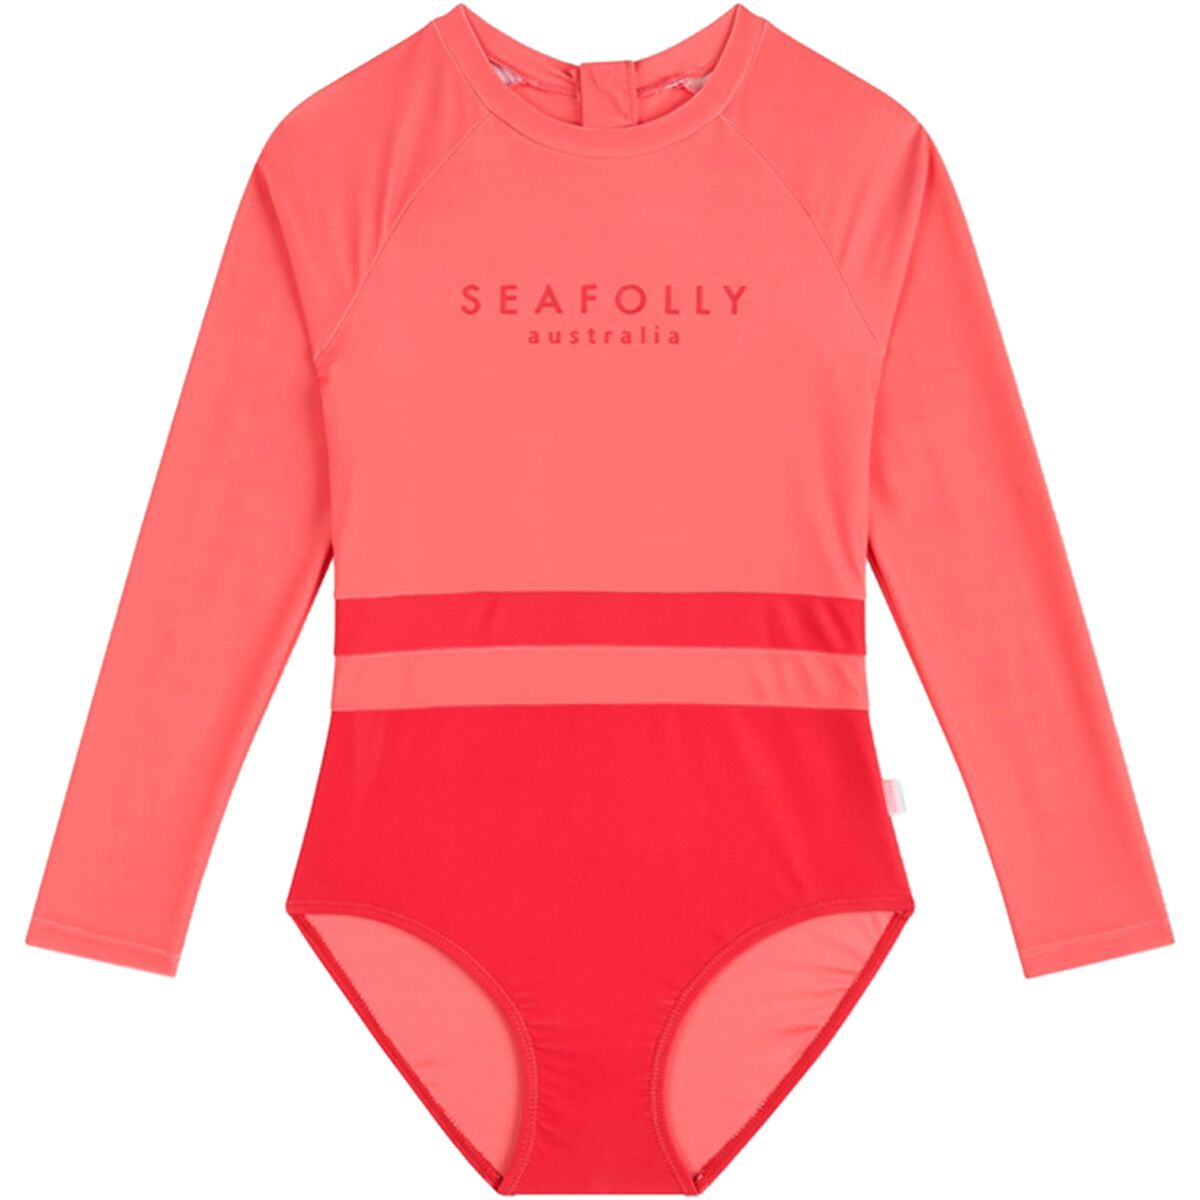 Seafolly Long-Sleeve Spliced Paddlesuit - Girls'